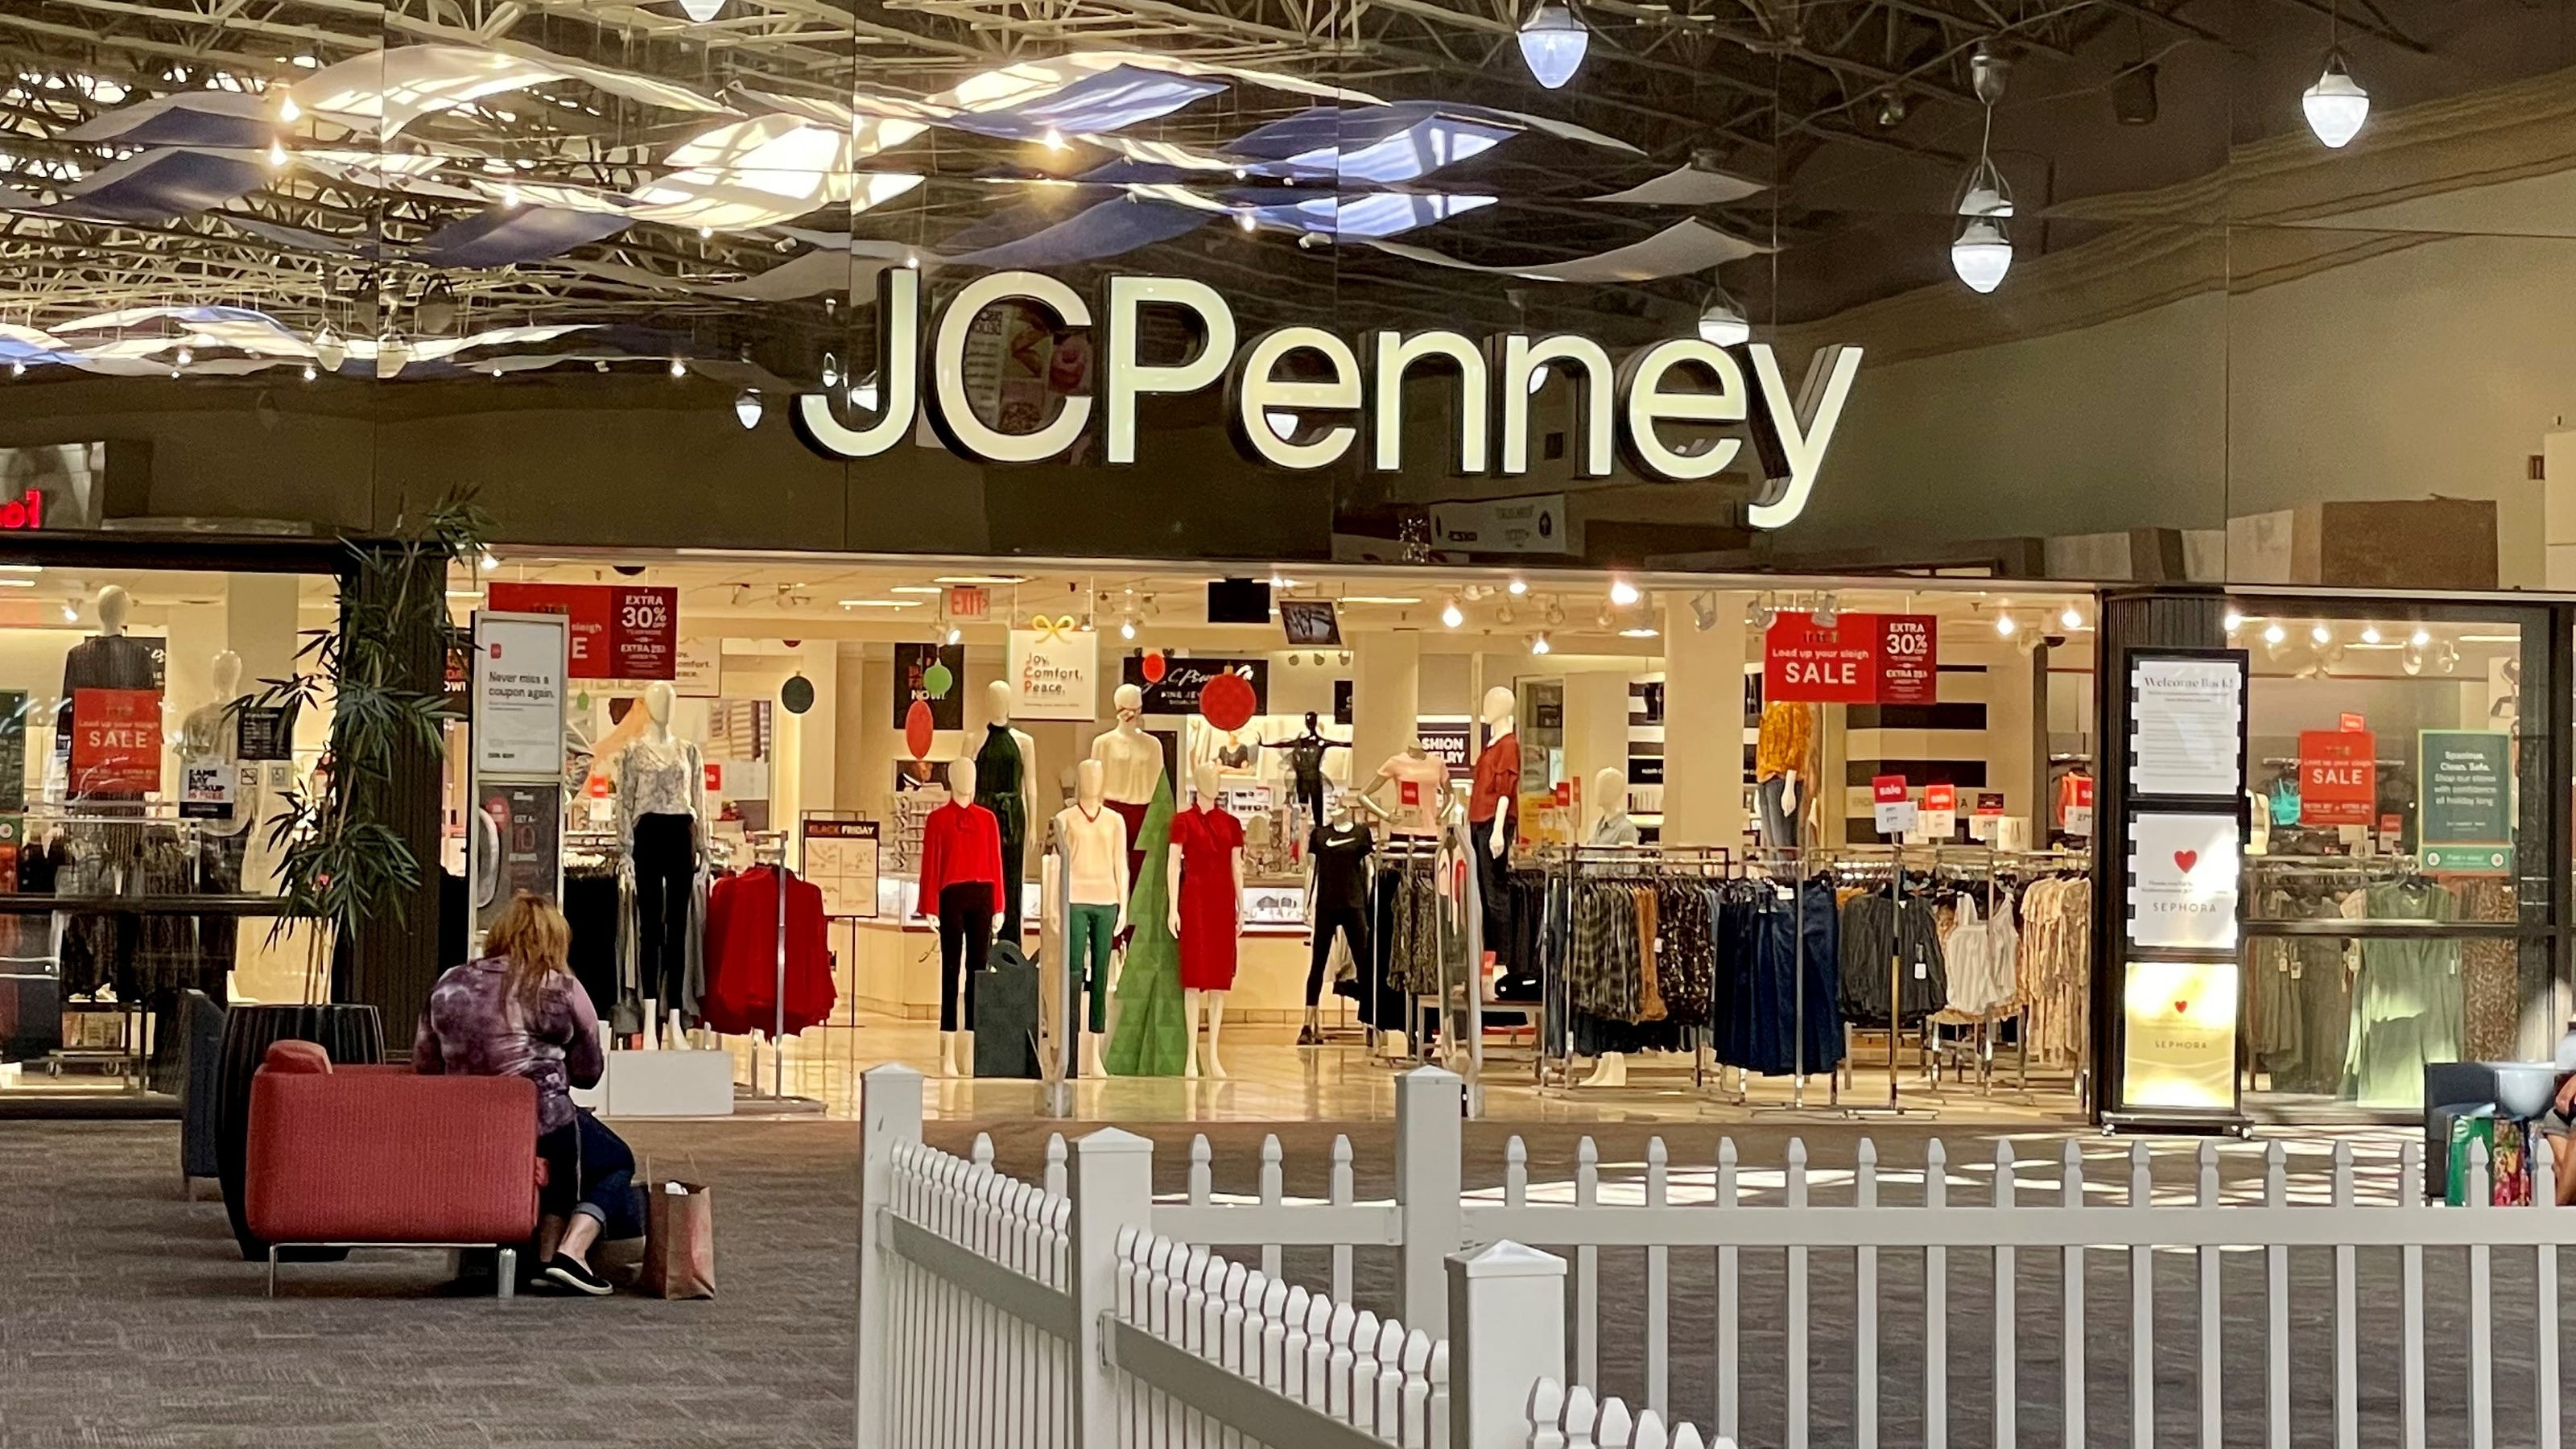 jcpenney-closing-stores-18-locations-scheduled-to-close-may-16